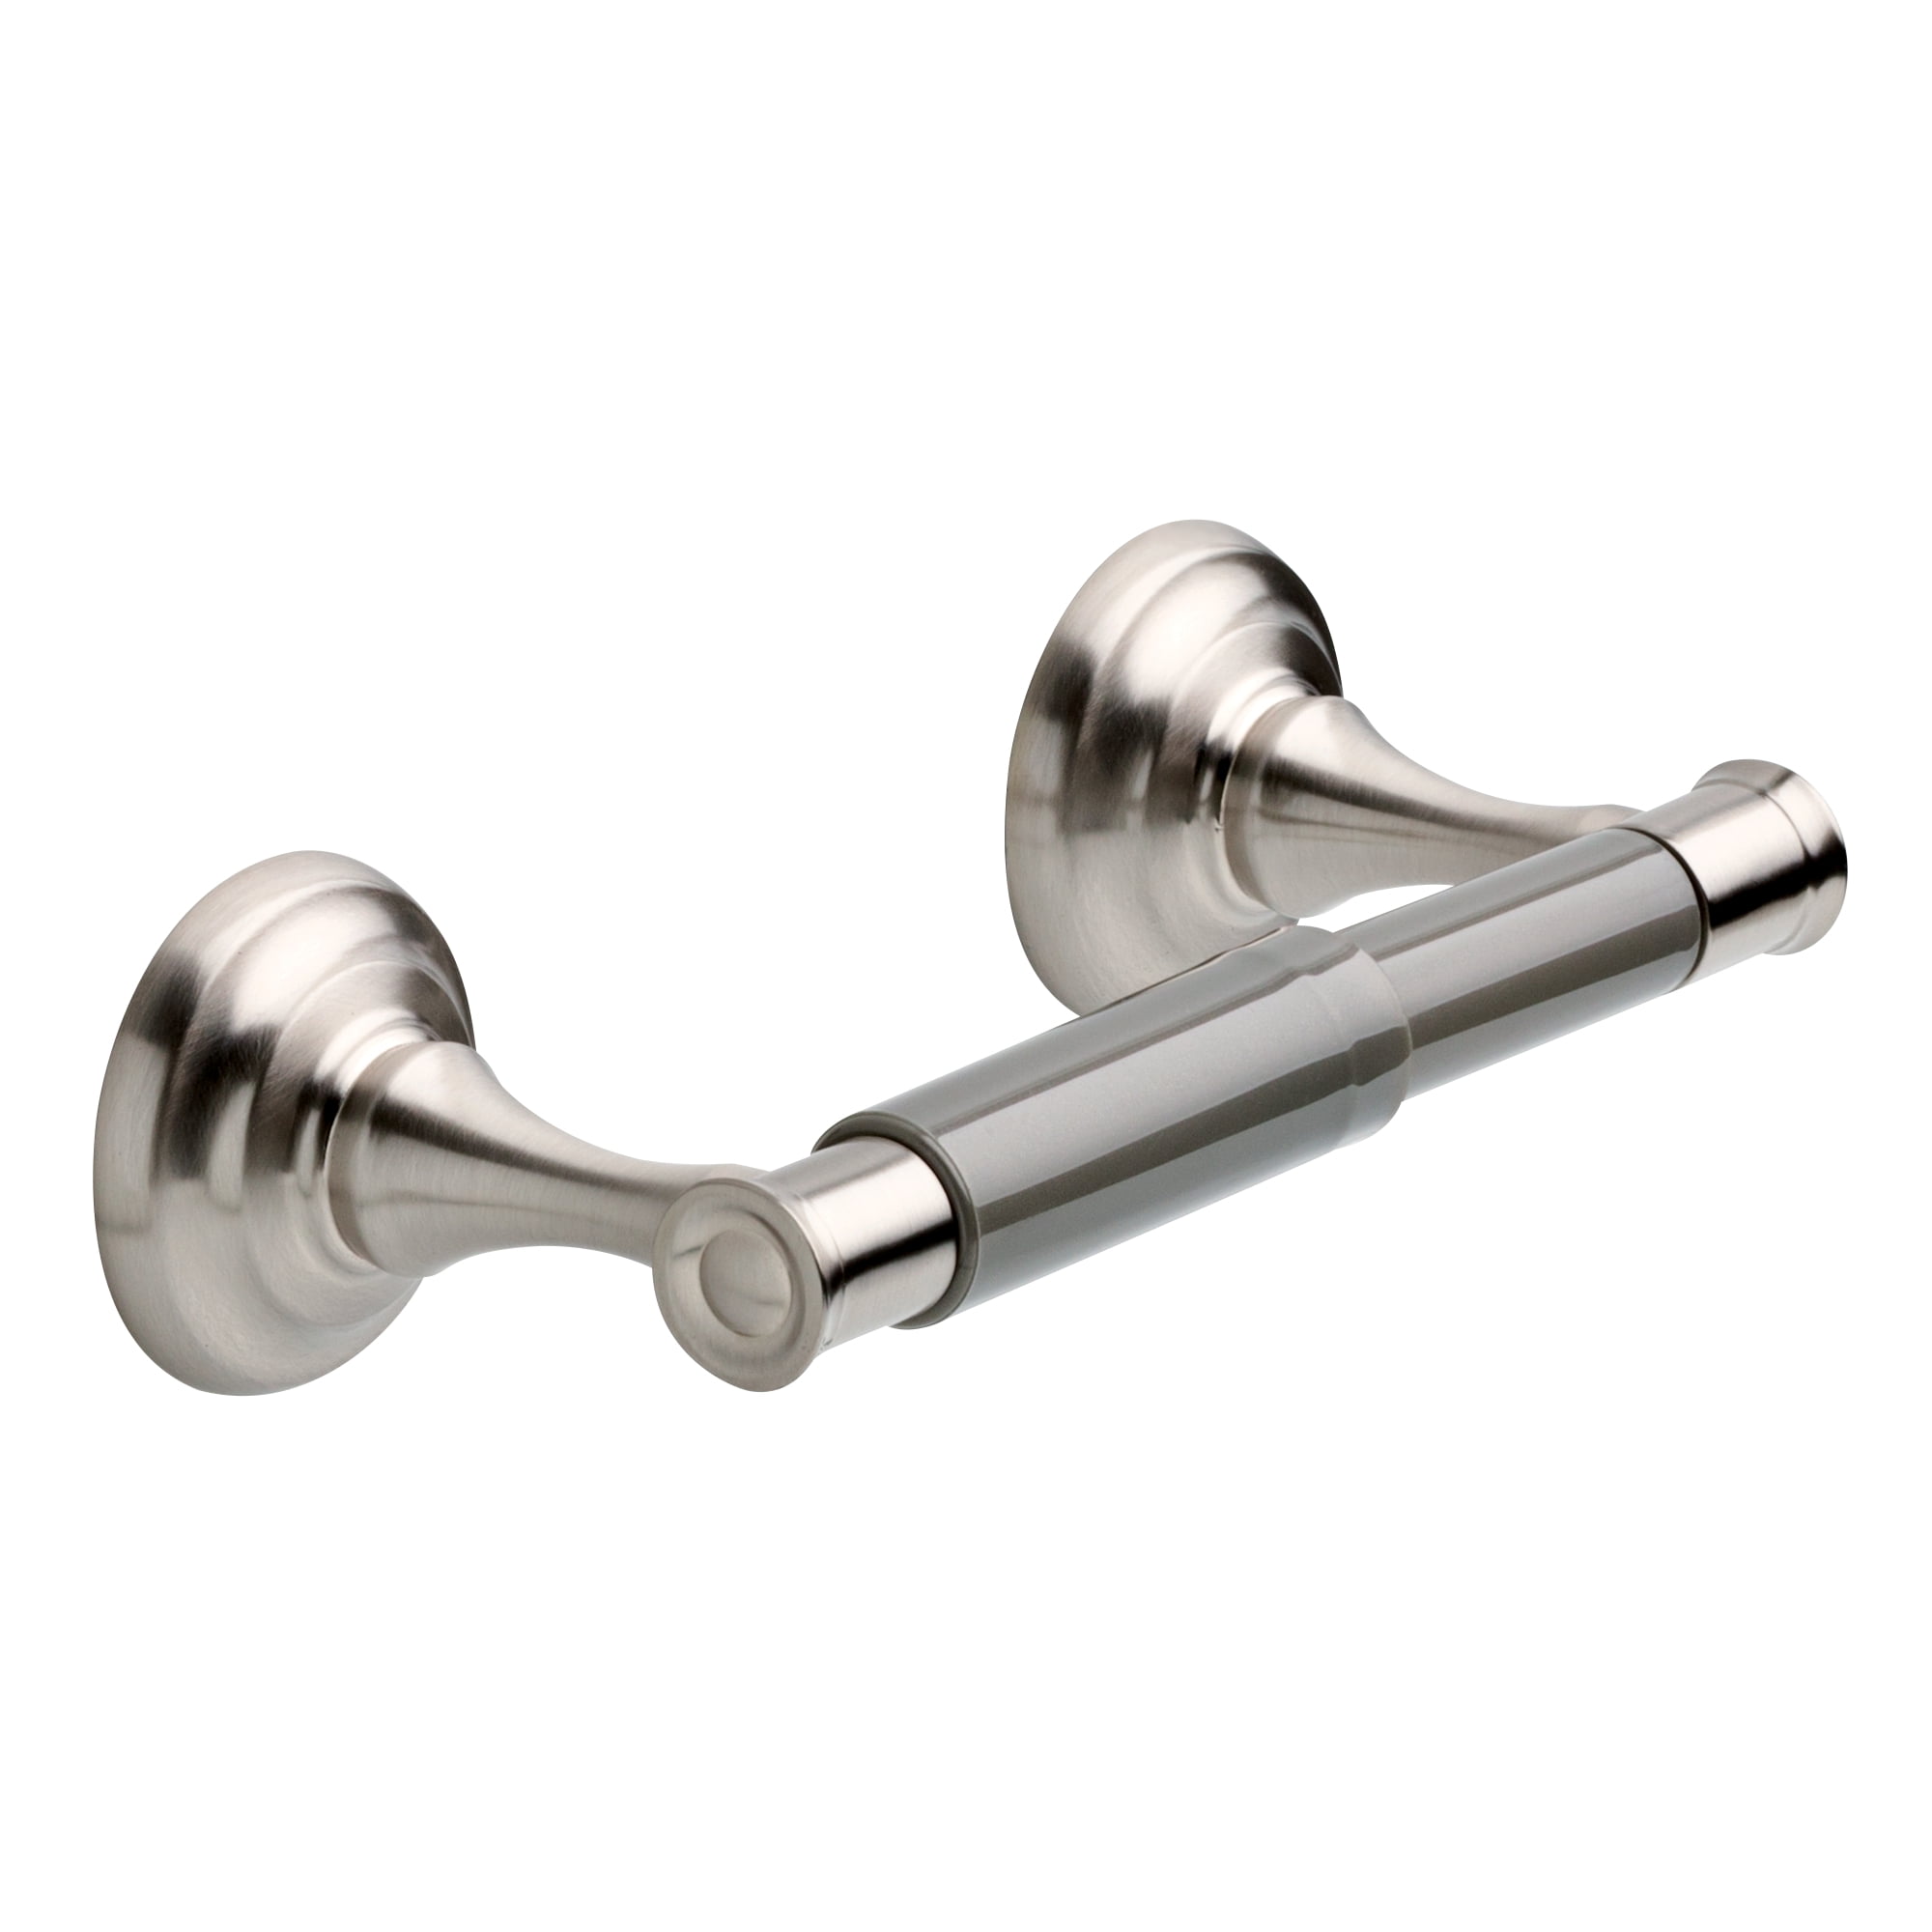 Better Homes & Gardens Cameron Wall Mount Spring-Loaded Toilet Paper Holder in Nickel